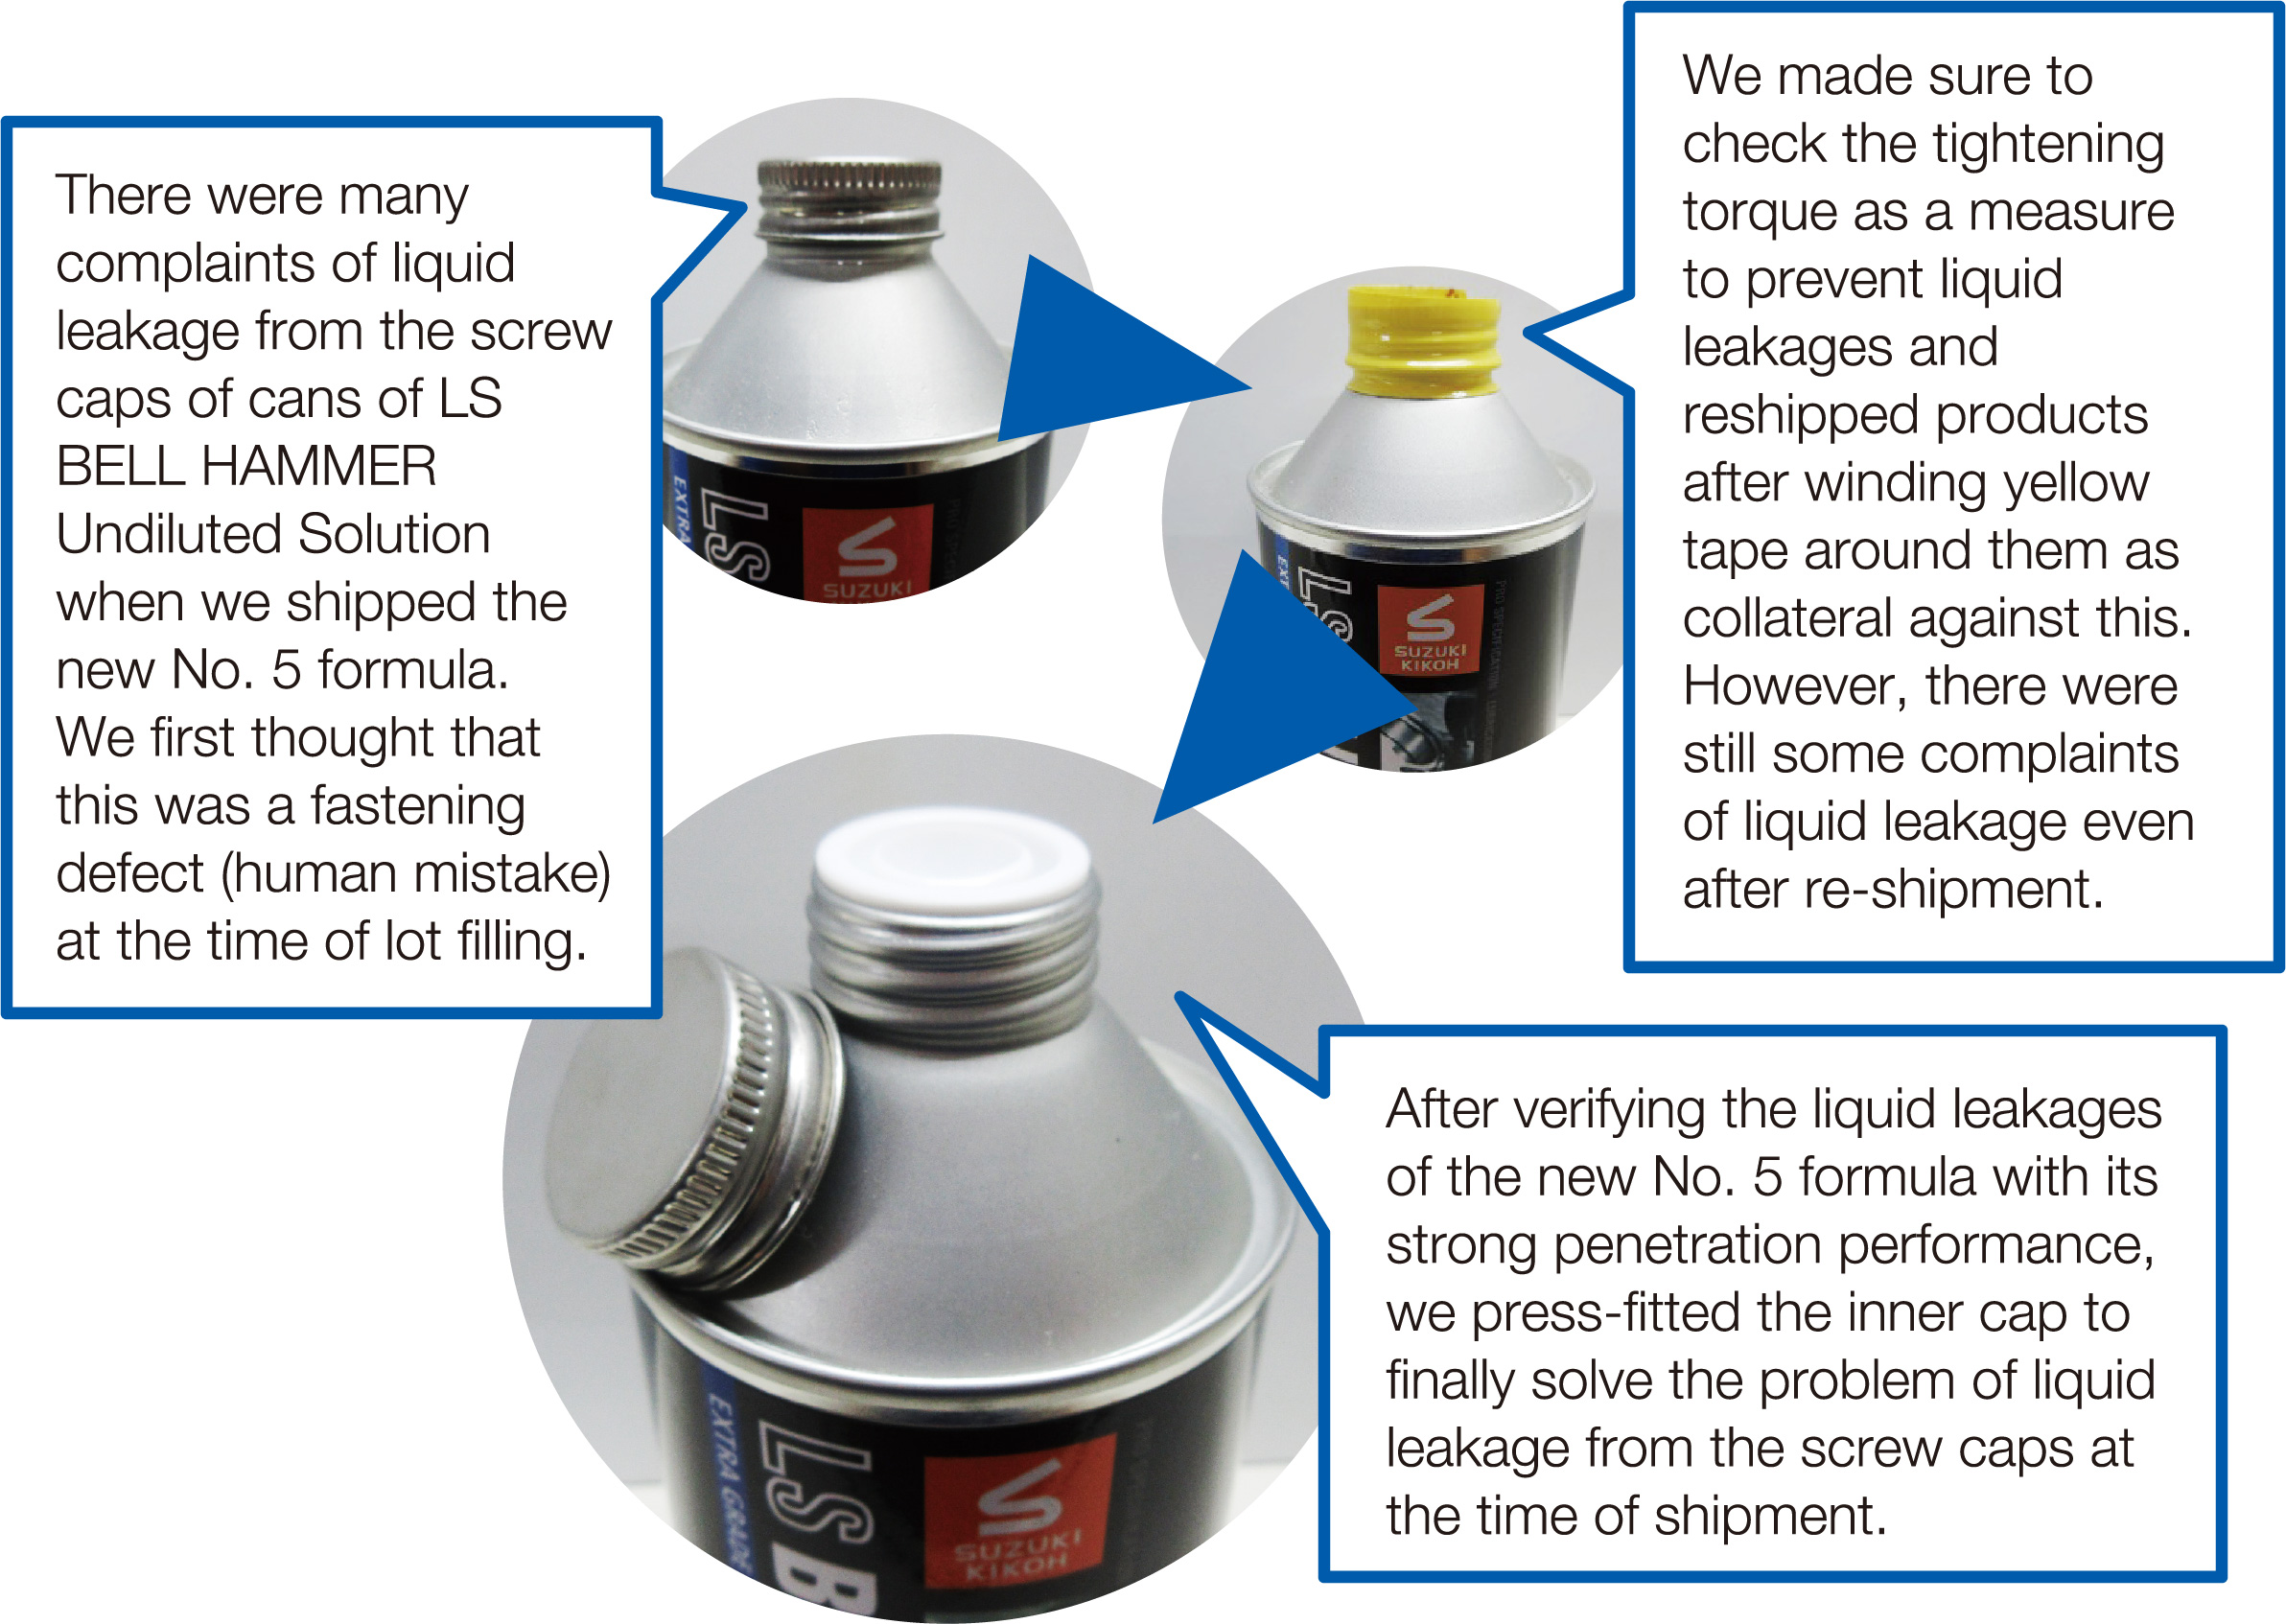 There were many complaints of liquid leakage from the screw caps of cans of LS BELL HAMMER Undiluted Solution when we shipped the new No. 5 formula.